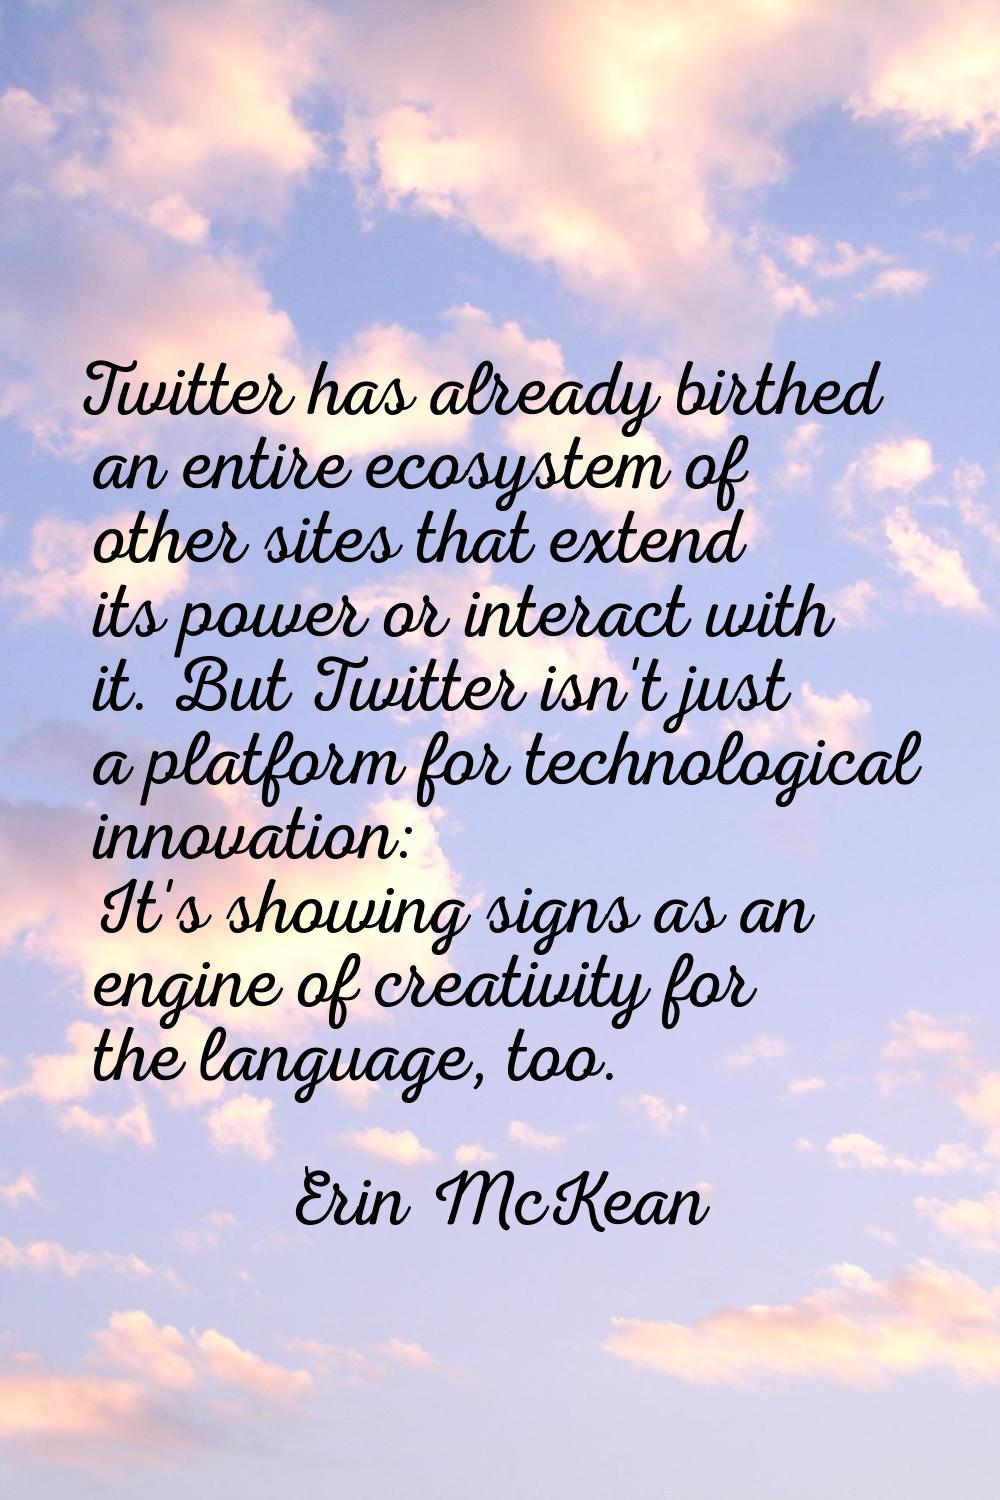 Twitter has already birthed an entire ecosystem of other sites that extend its power or interact wi